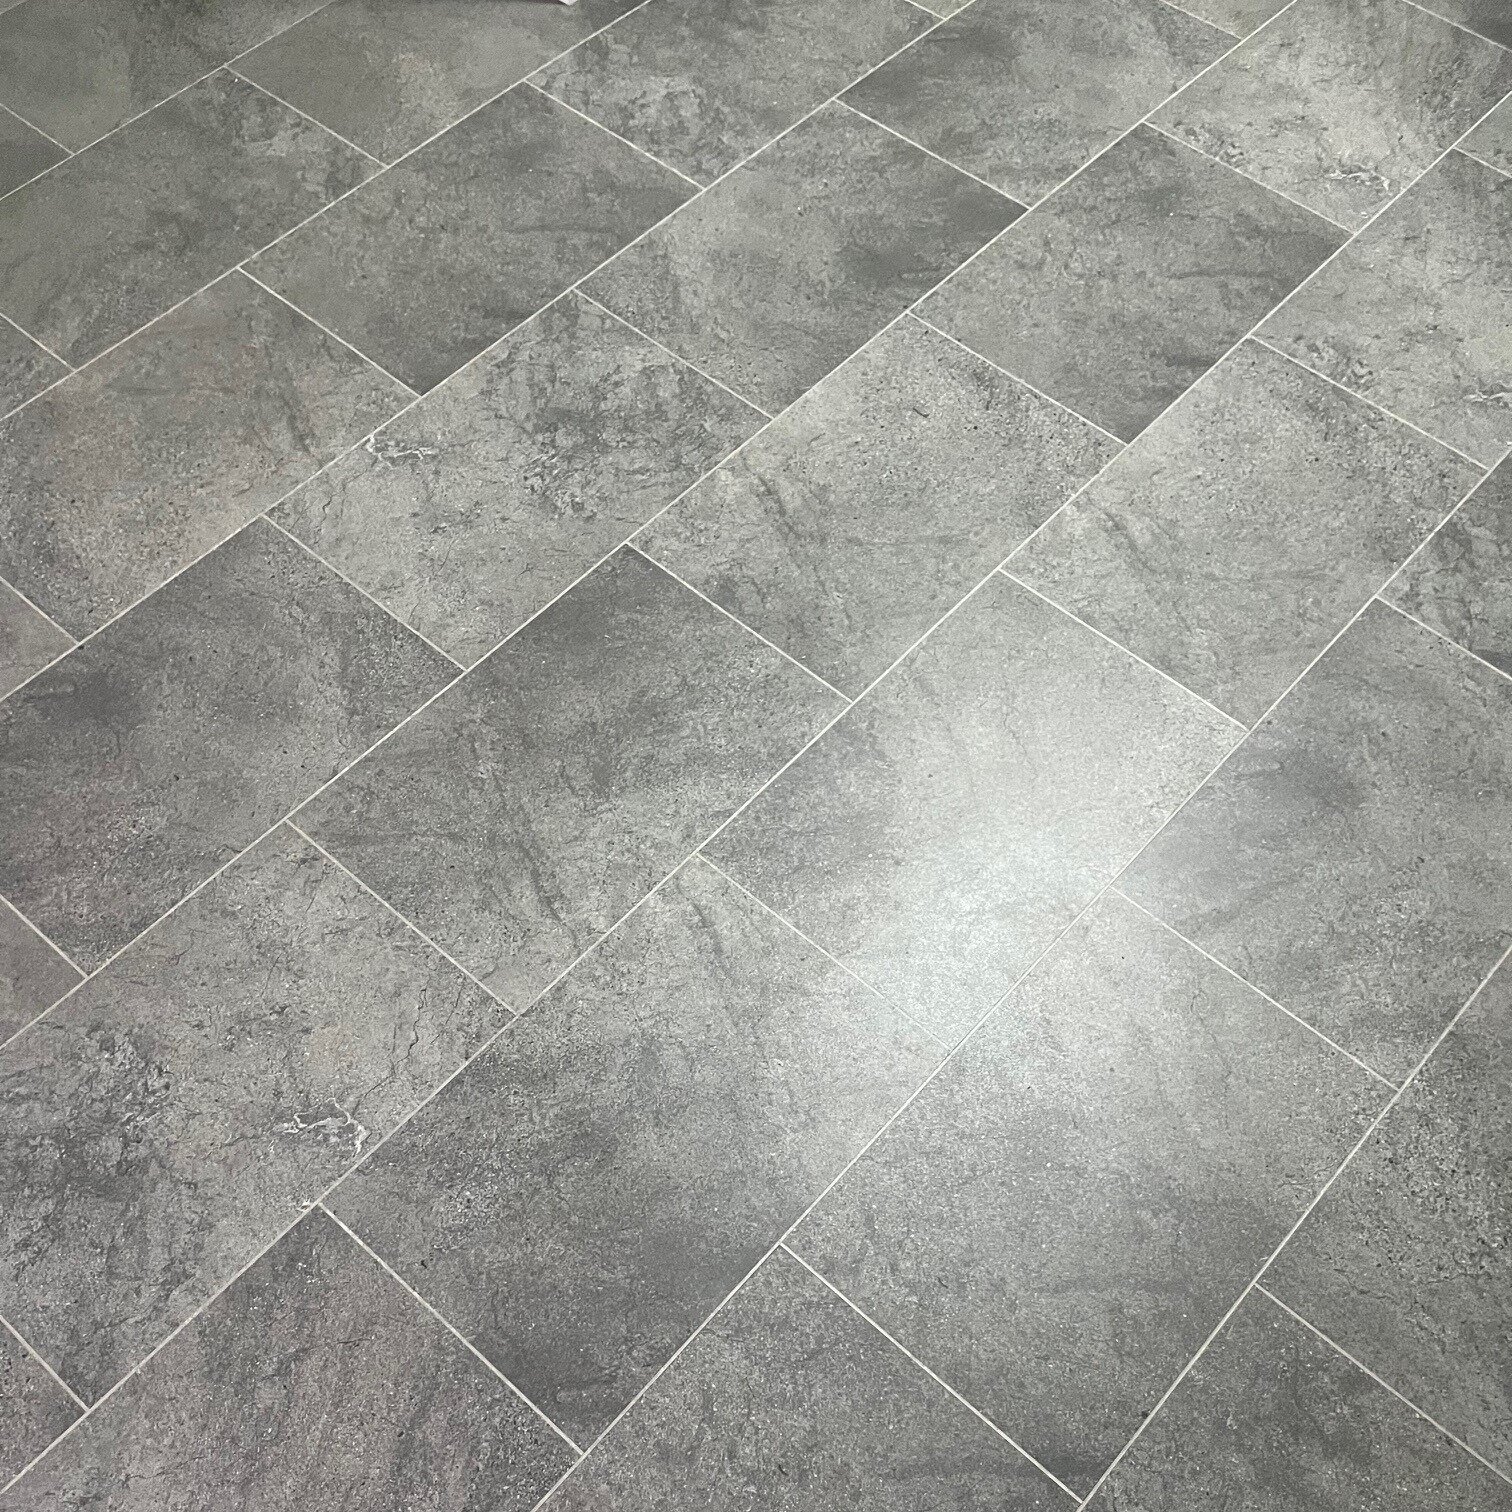 @karndean_uk Knight Tile - Cumbrian Stone ST14

One of the darkest tiles in their Knight Tile collection, Cumbrian Stone, combines smoky charcoal and carbon tones in a contemporary wider scale 18x12&quot; tile format. Because of its darker colouring 